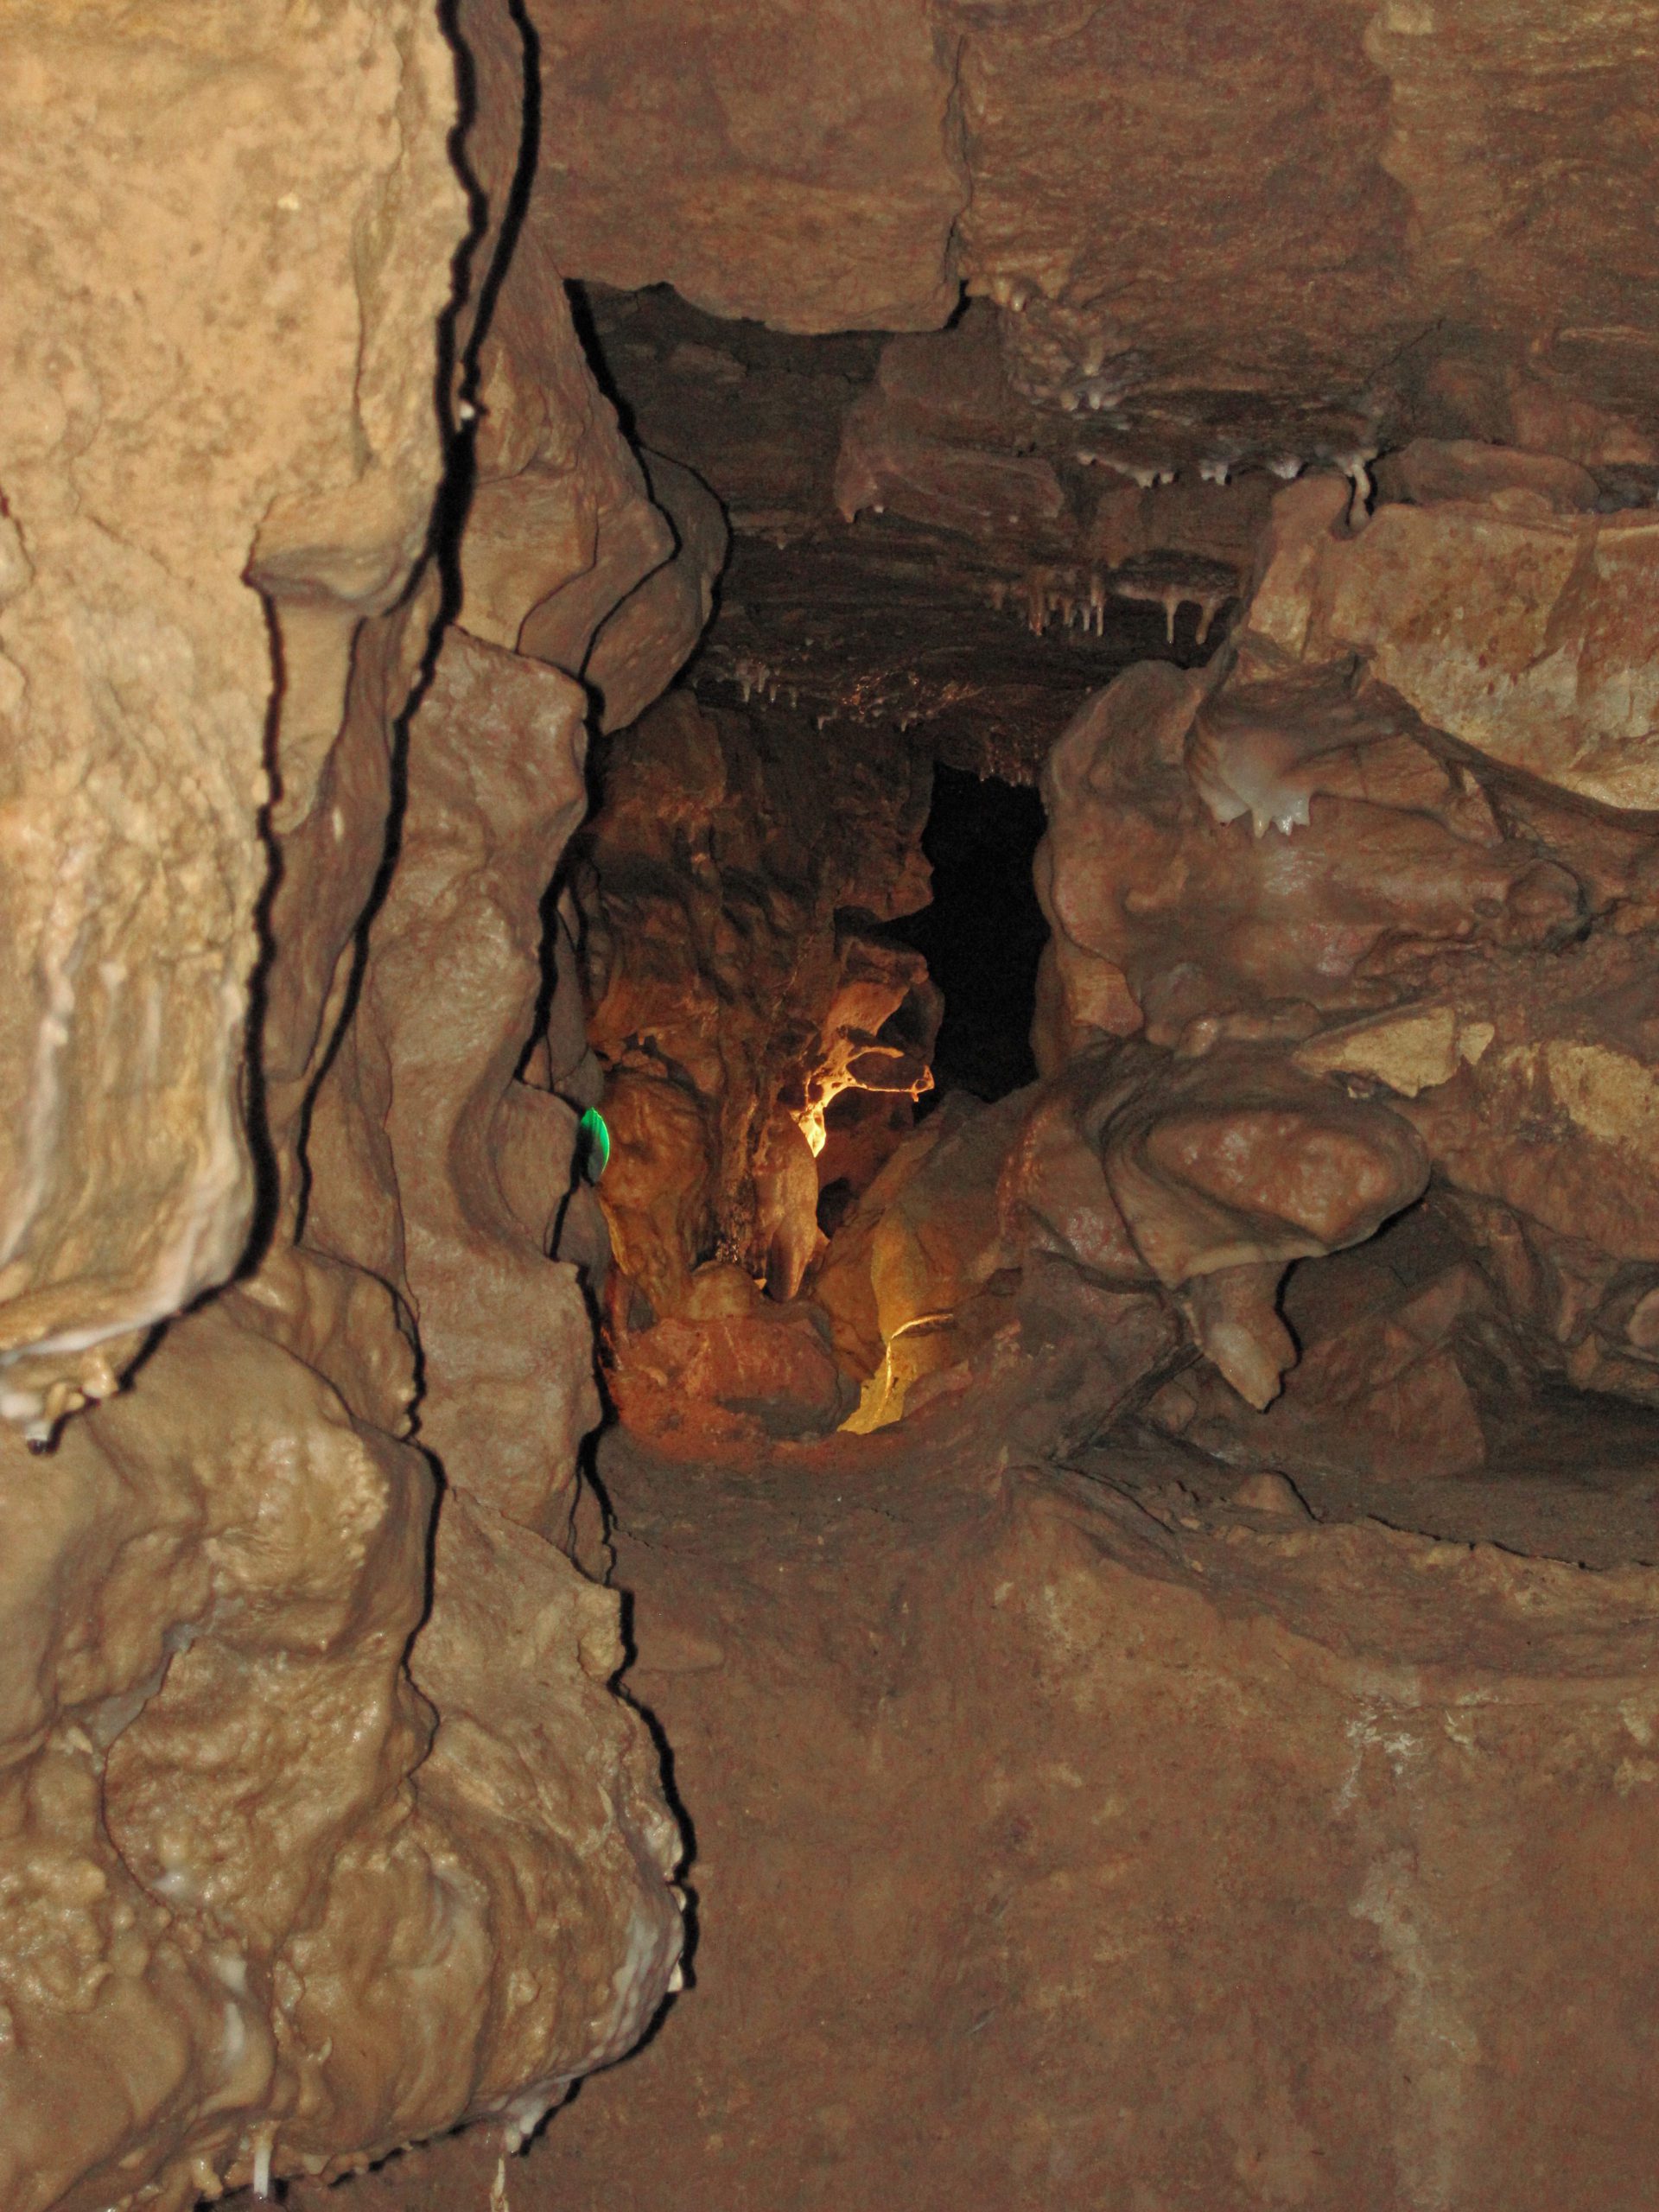 underground cave passageway lit up by a lamp